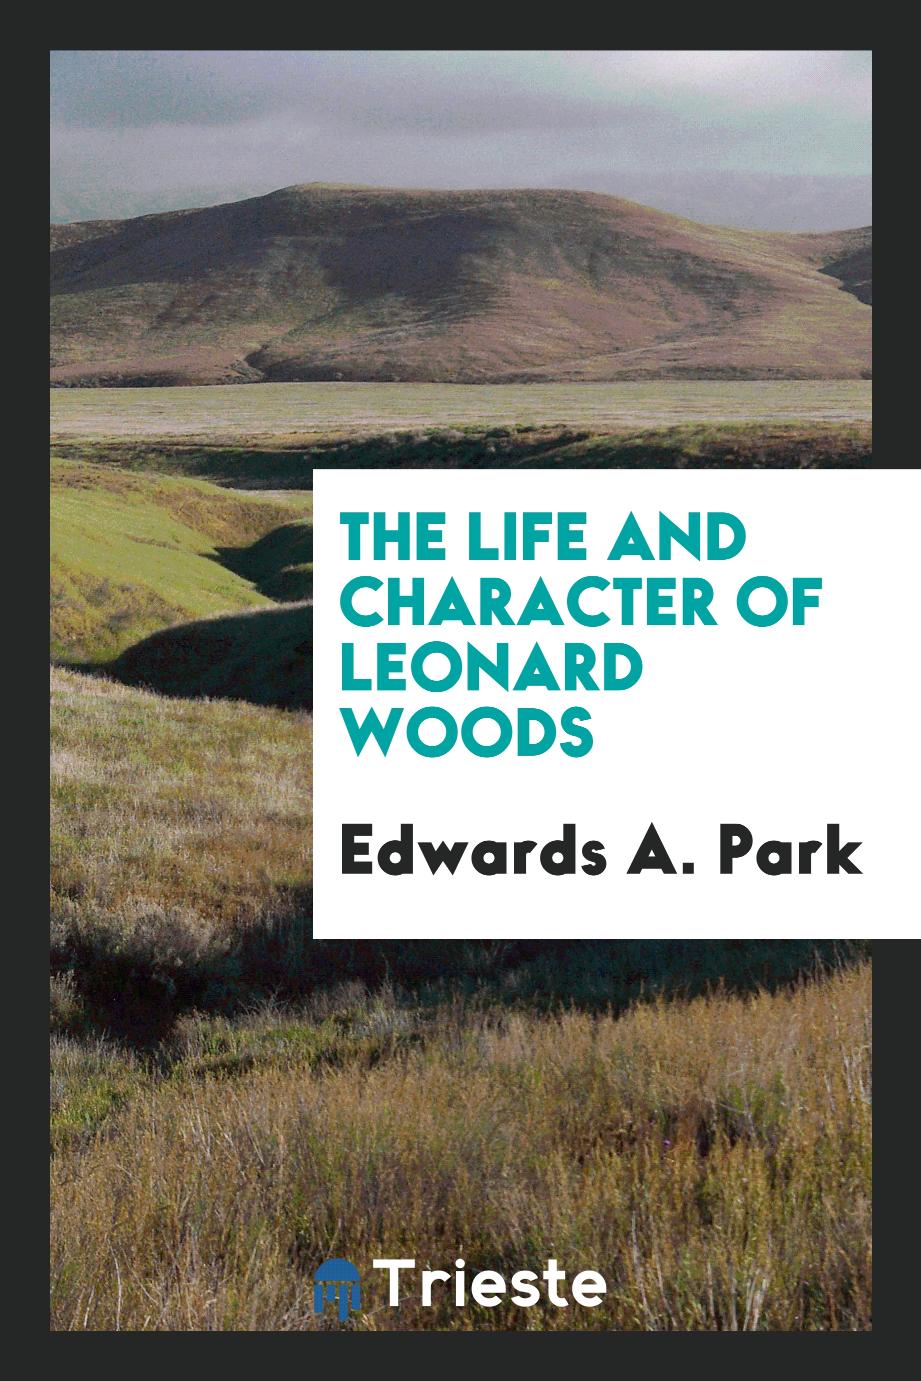 Edwards A. Park - The Life and Character of Leonard Woods